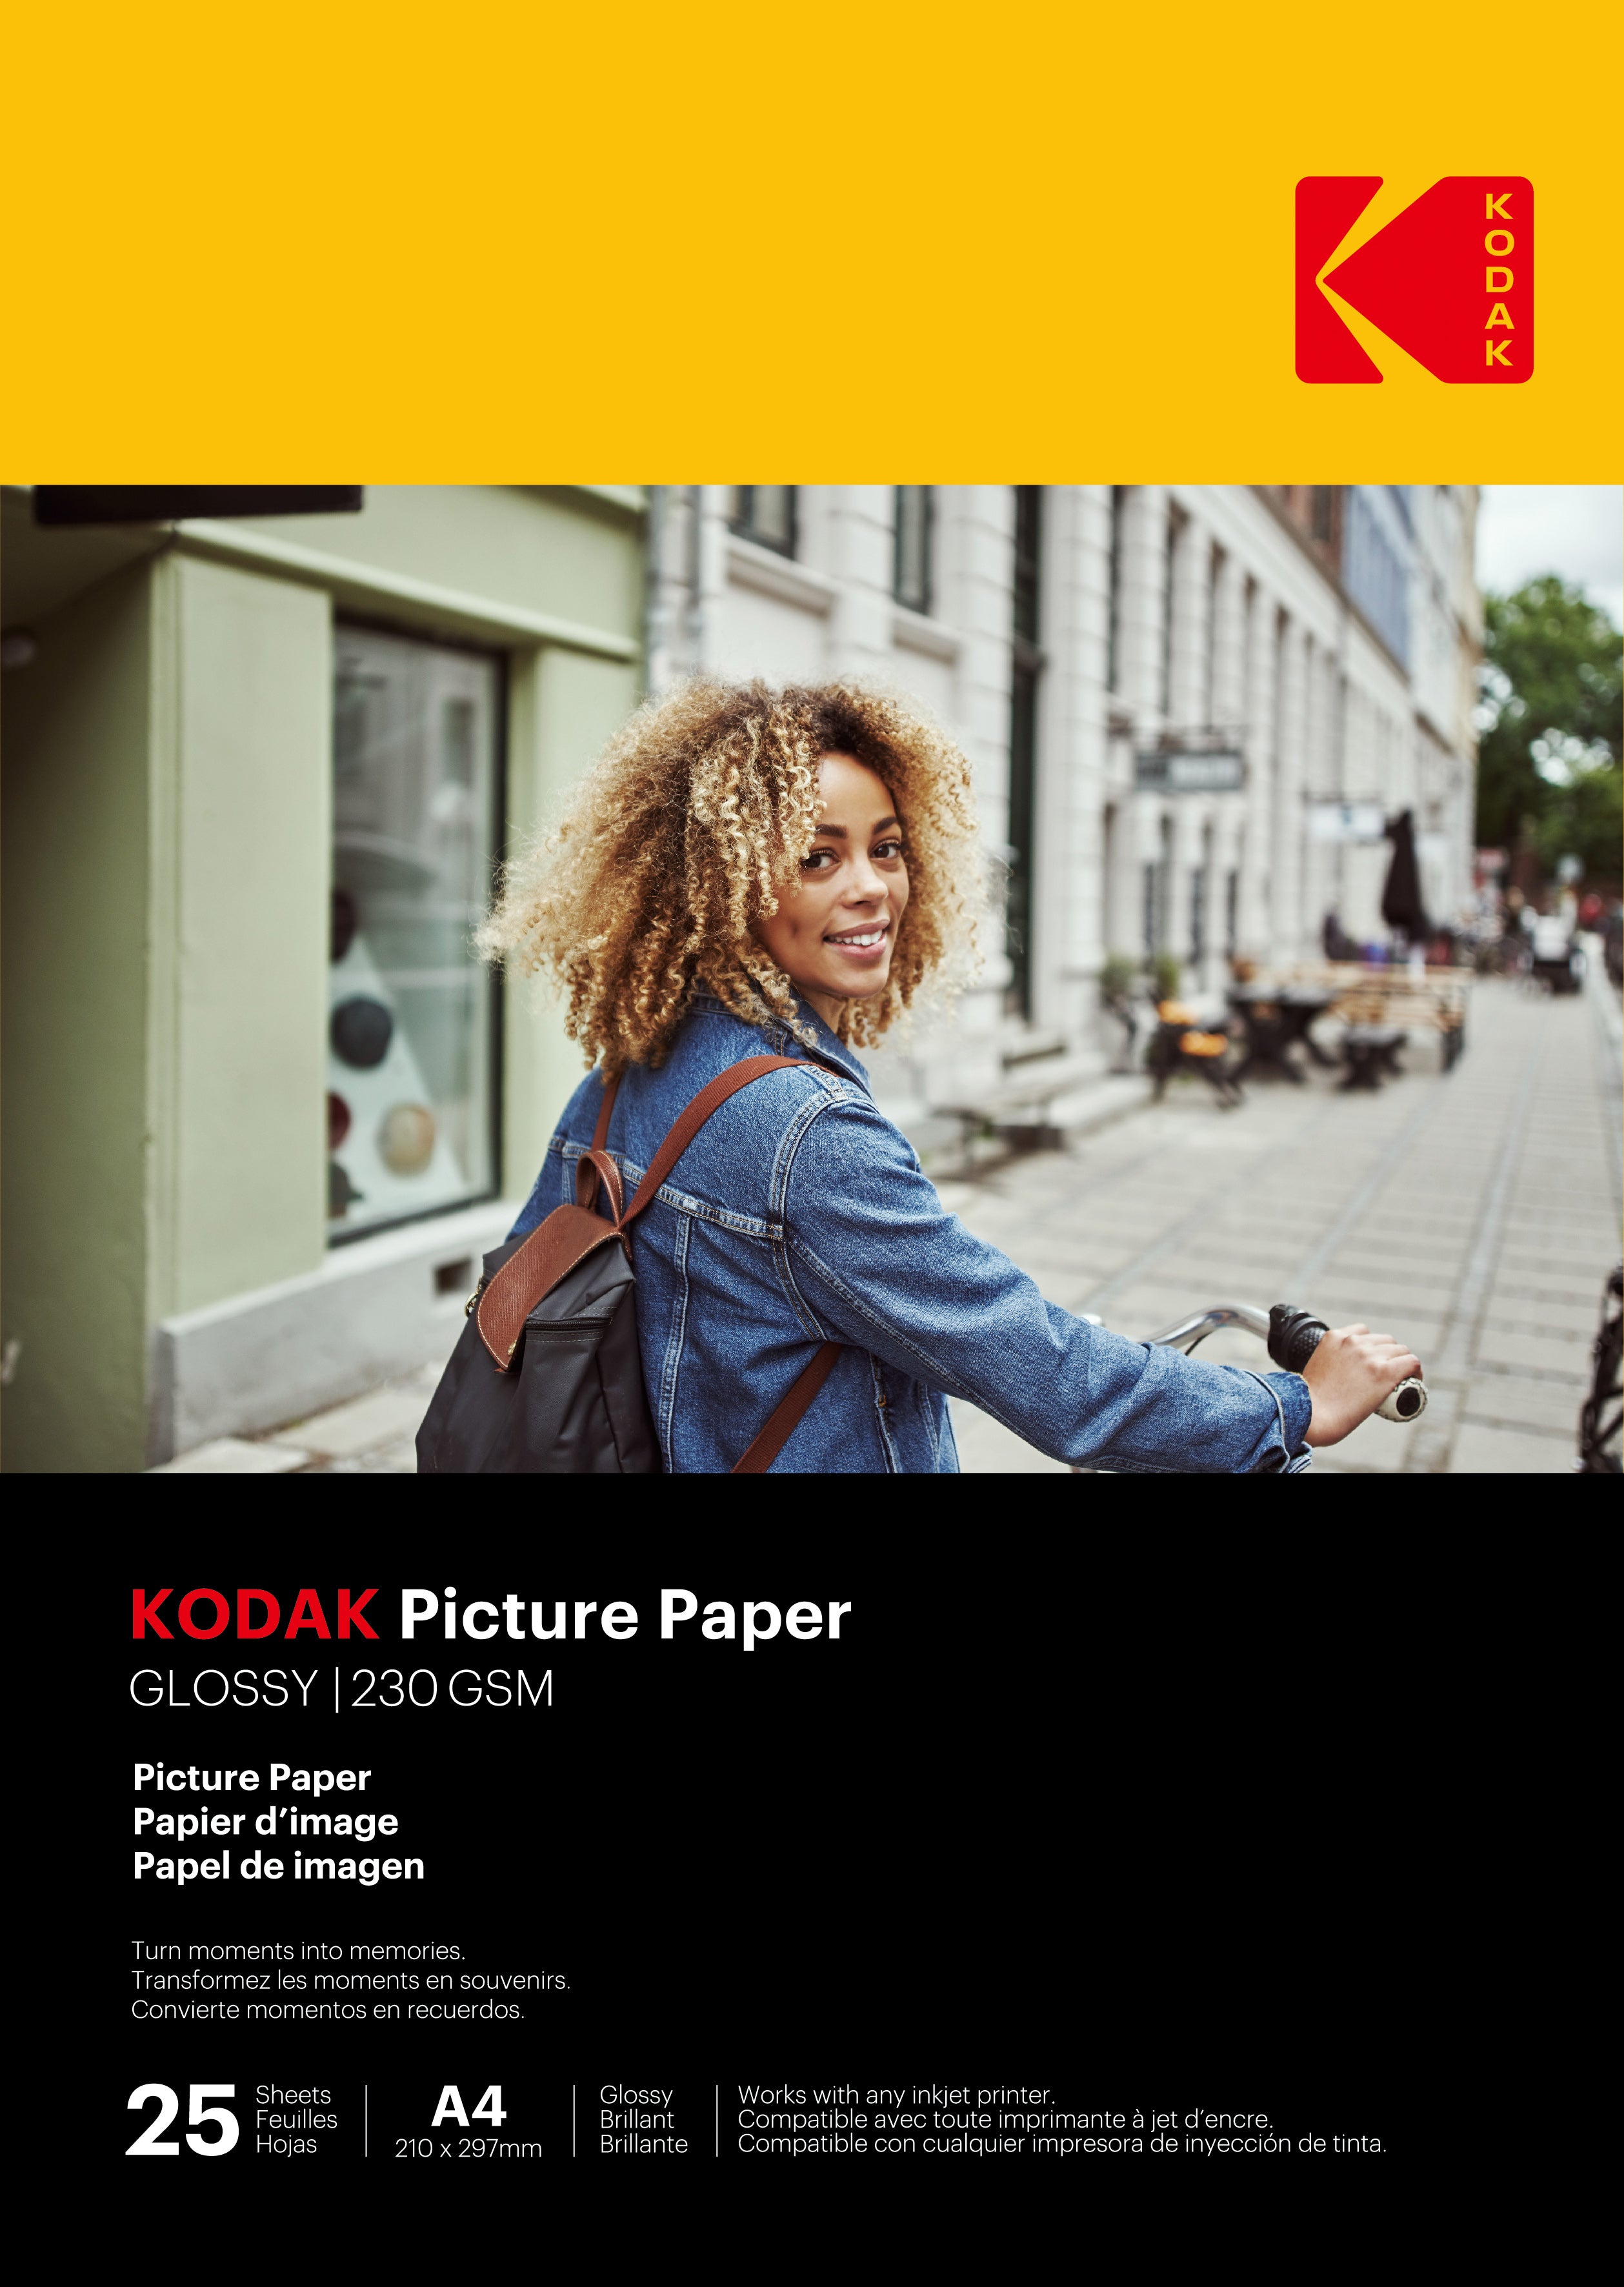 Kodak Picture Paper  Glossy  230 gsm  A4 Size x 25 Sheets